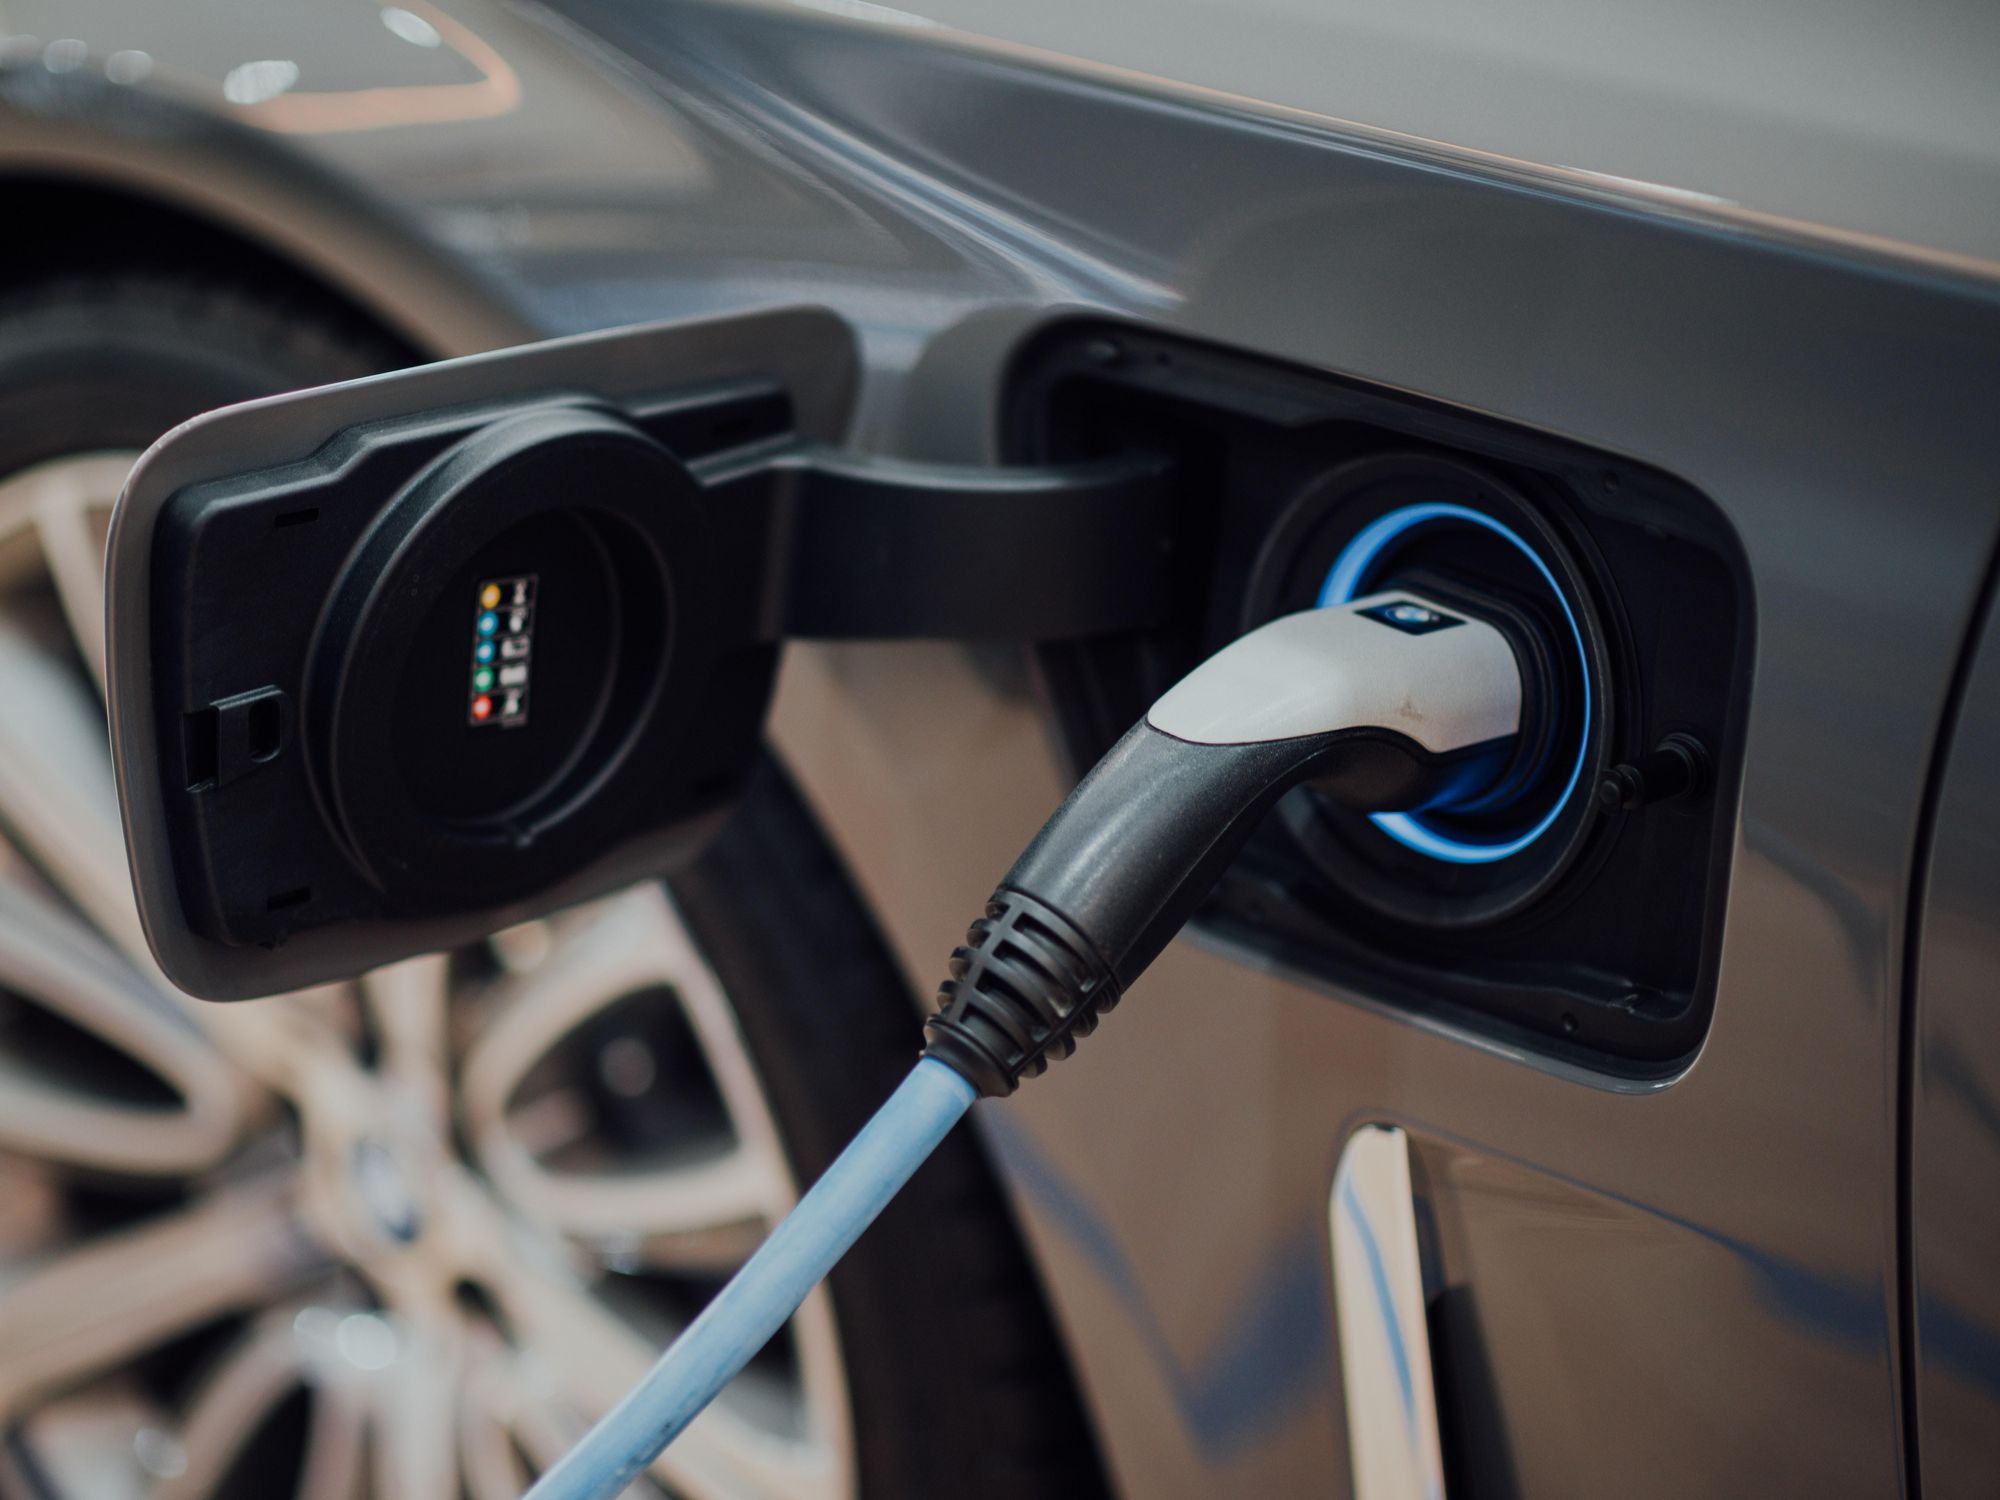 Does California's New EV 'Transparency' Law Give Companies a Loophole?